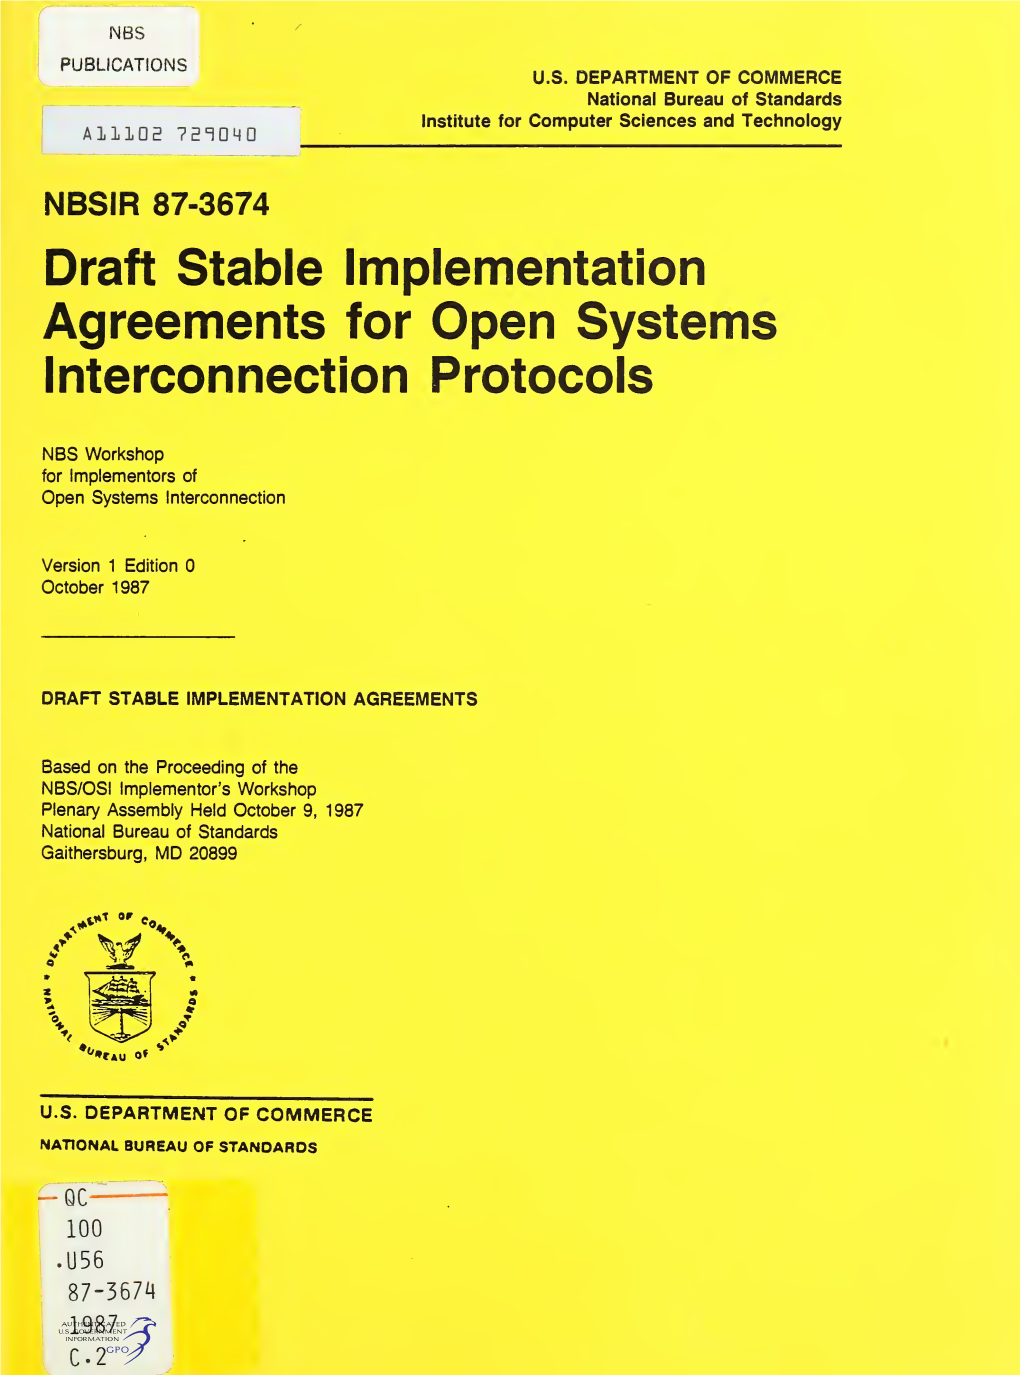 Draft Stable Implementation Agreement for Open